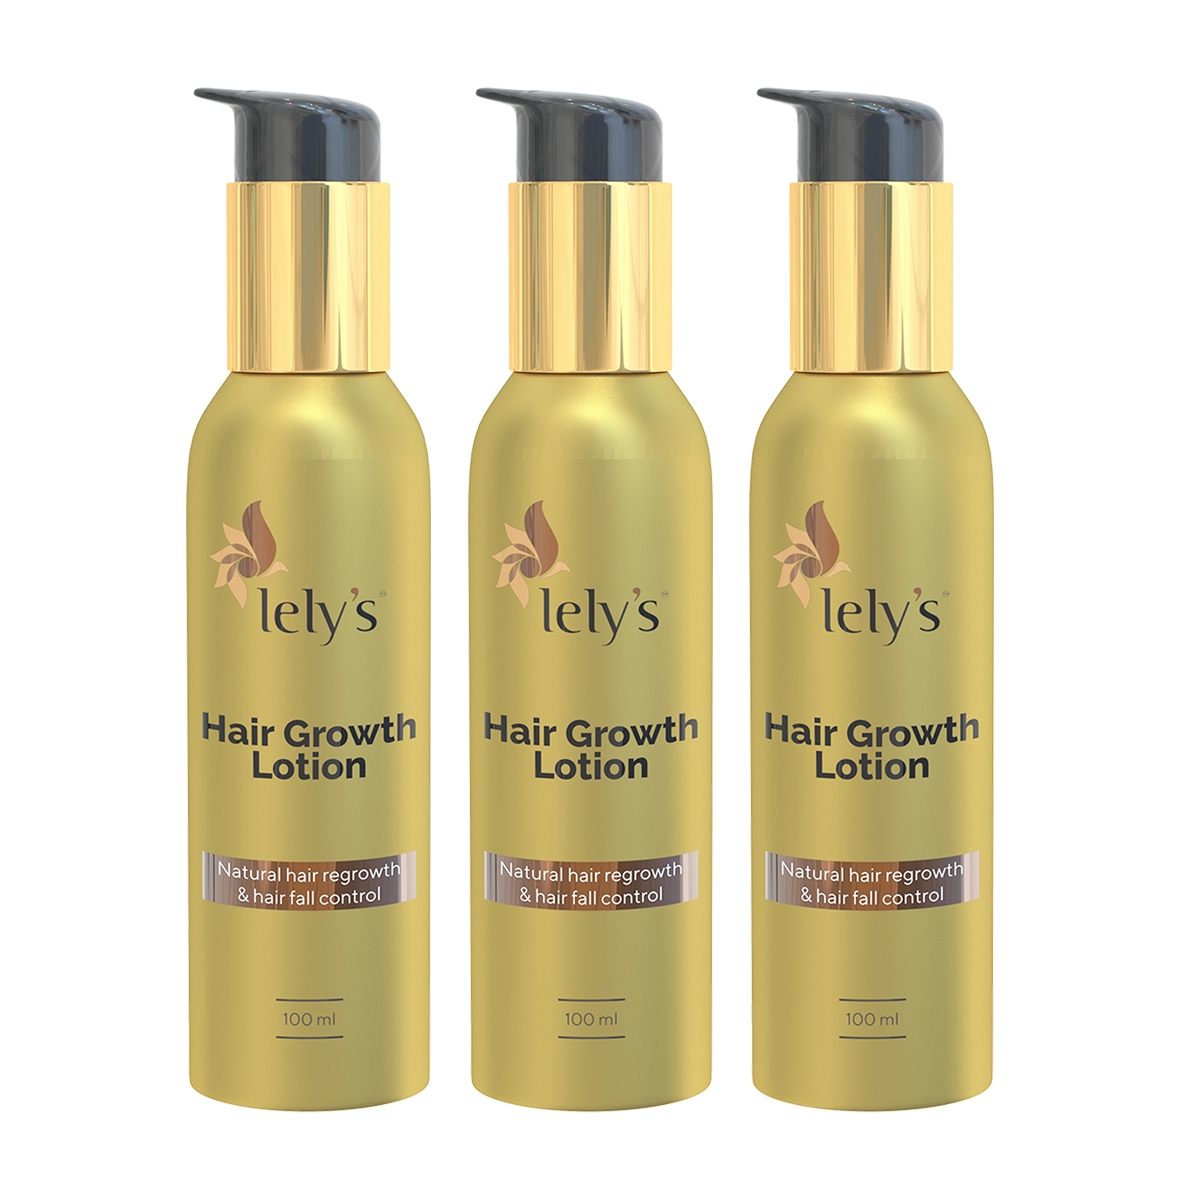 lely's | Lely's Hair Growth Lotion For Both Male And Female - Reduces Hairfall, Promotes Hair Growth, Strengthens Hair, For All Hair Types, Improve Scalp Conditions, Reduces Thinning Hair - 100 Ml Pack of 3 0